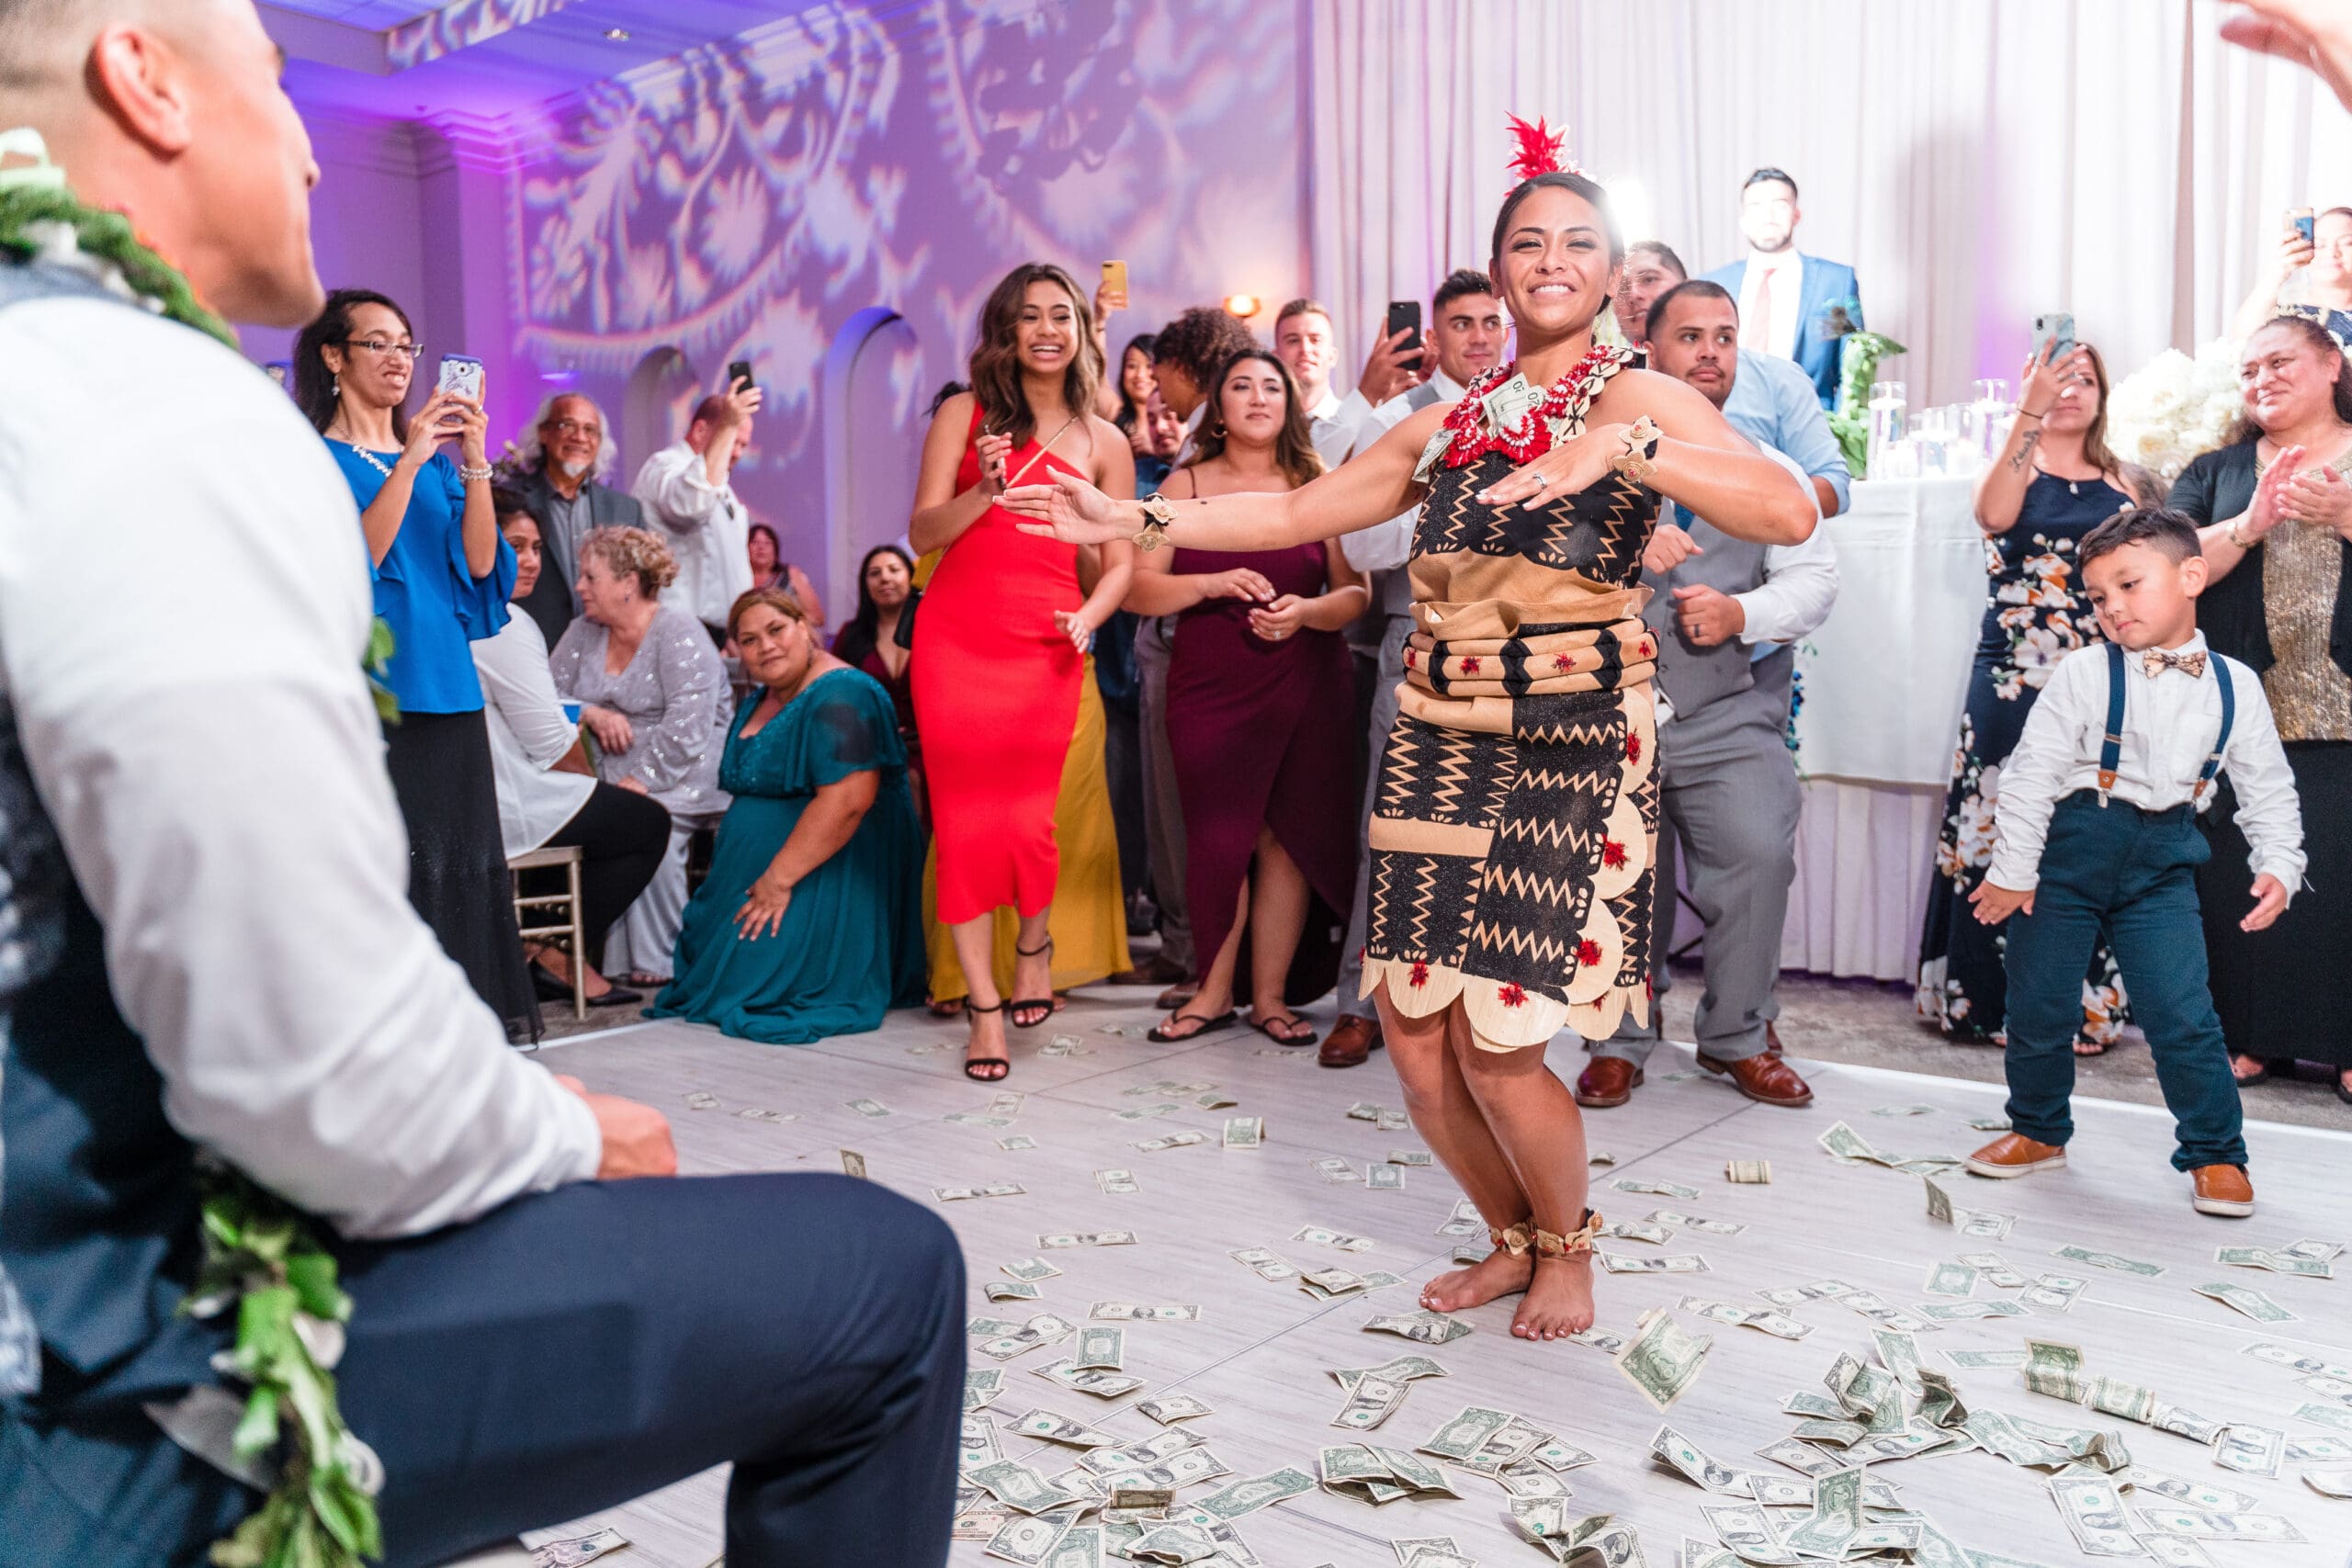 Bride dancing joyfully in traditional Hawaiian attire amidst scattered money on the ground, performing a lively hula move with a radiant smile, surrounded by friends and family dancing in celebration.